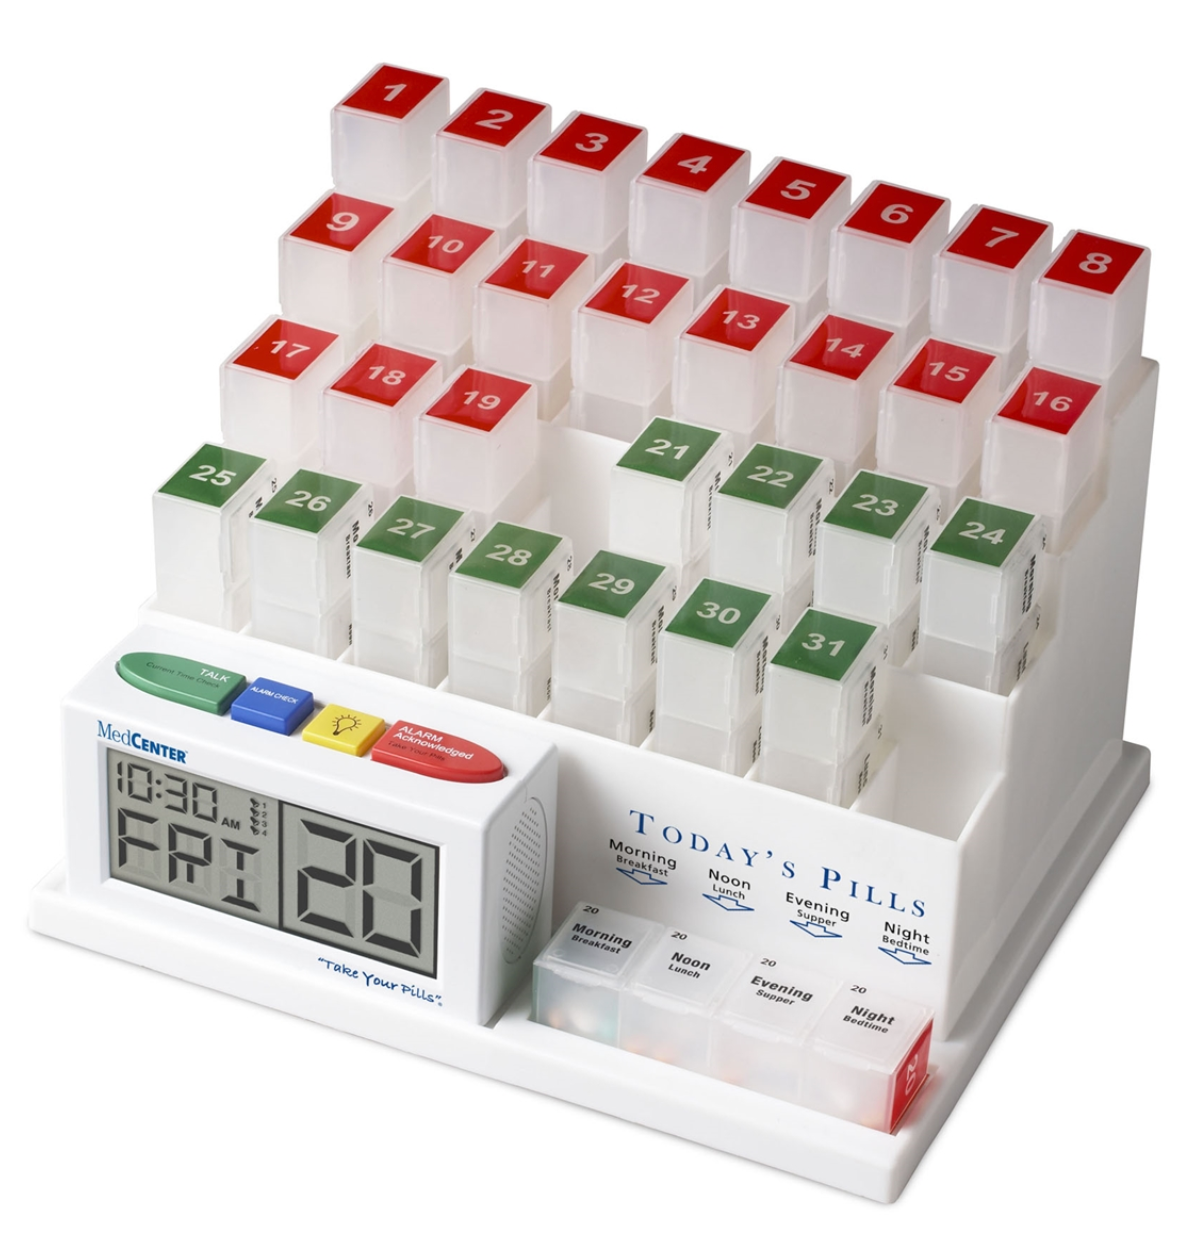 MedCenter 31 Day Pill Organizer with Reminder System